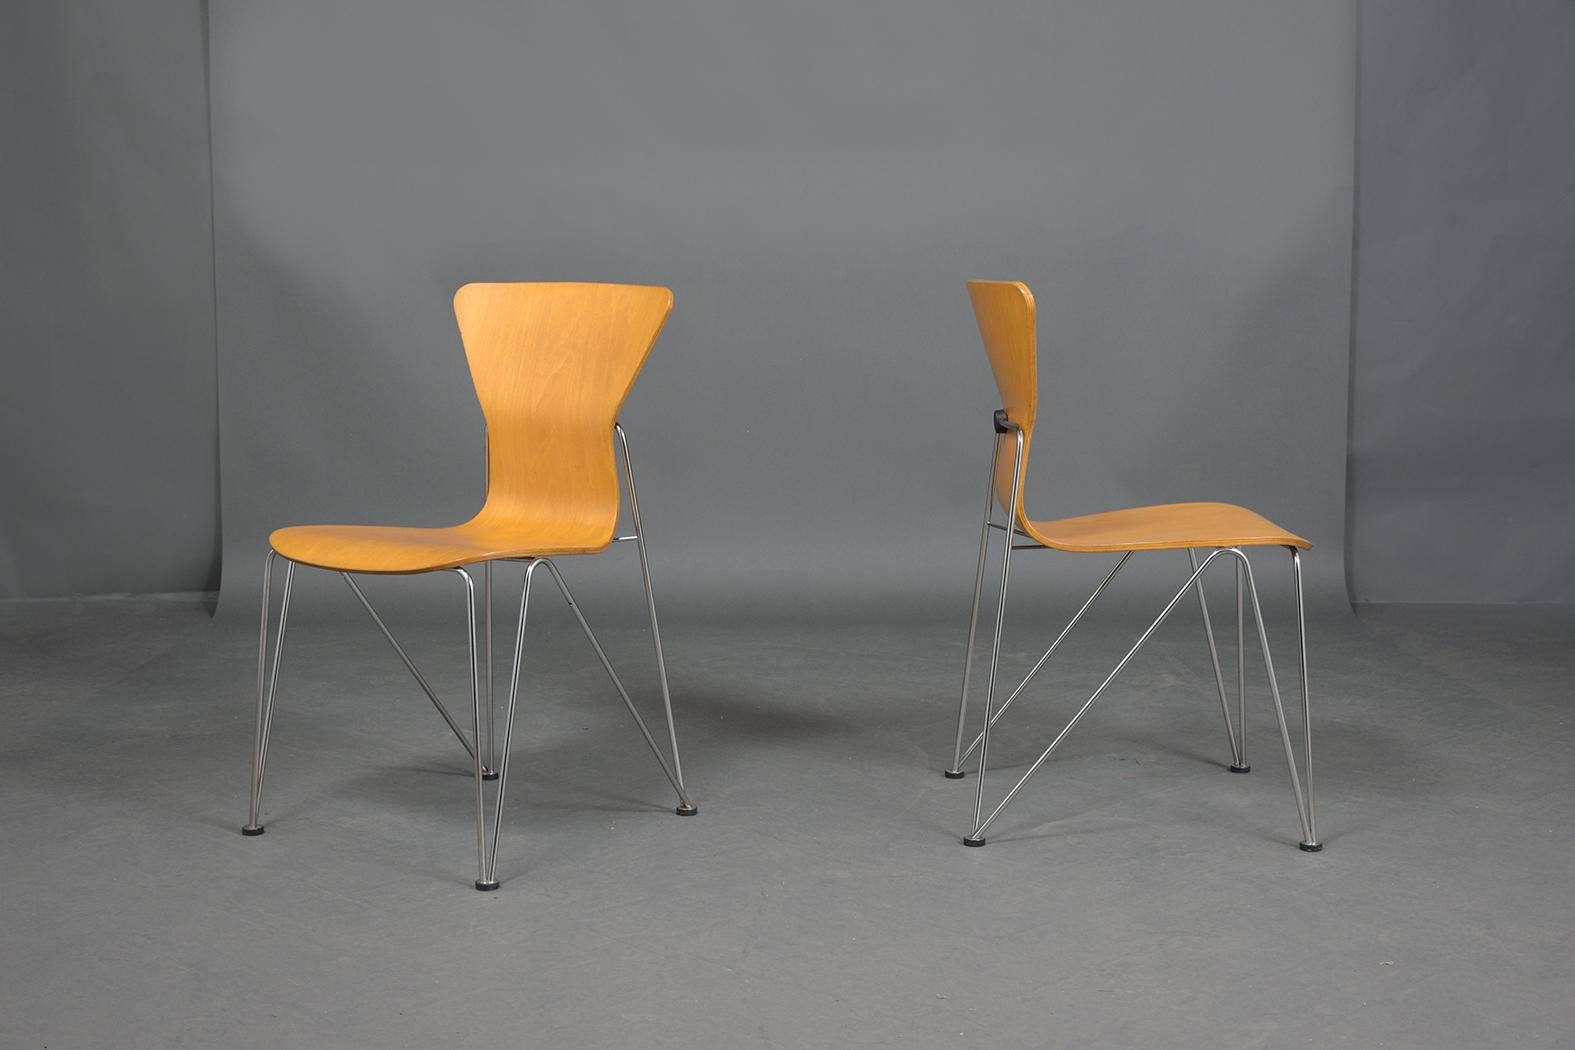 American Set of Four Mid-Century Plywood Chairs